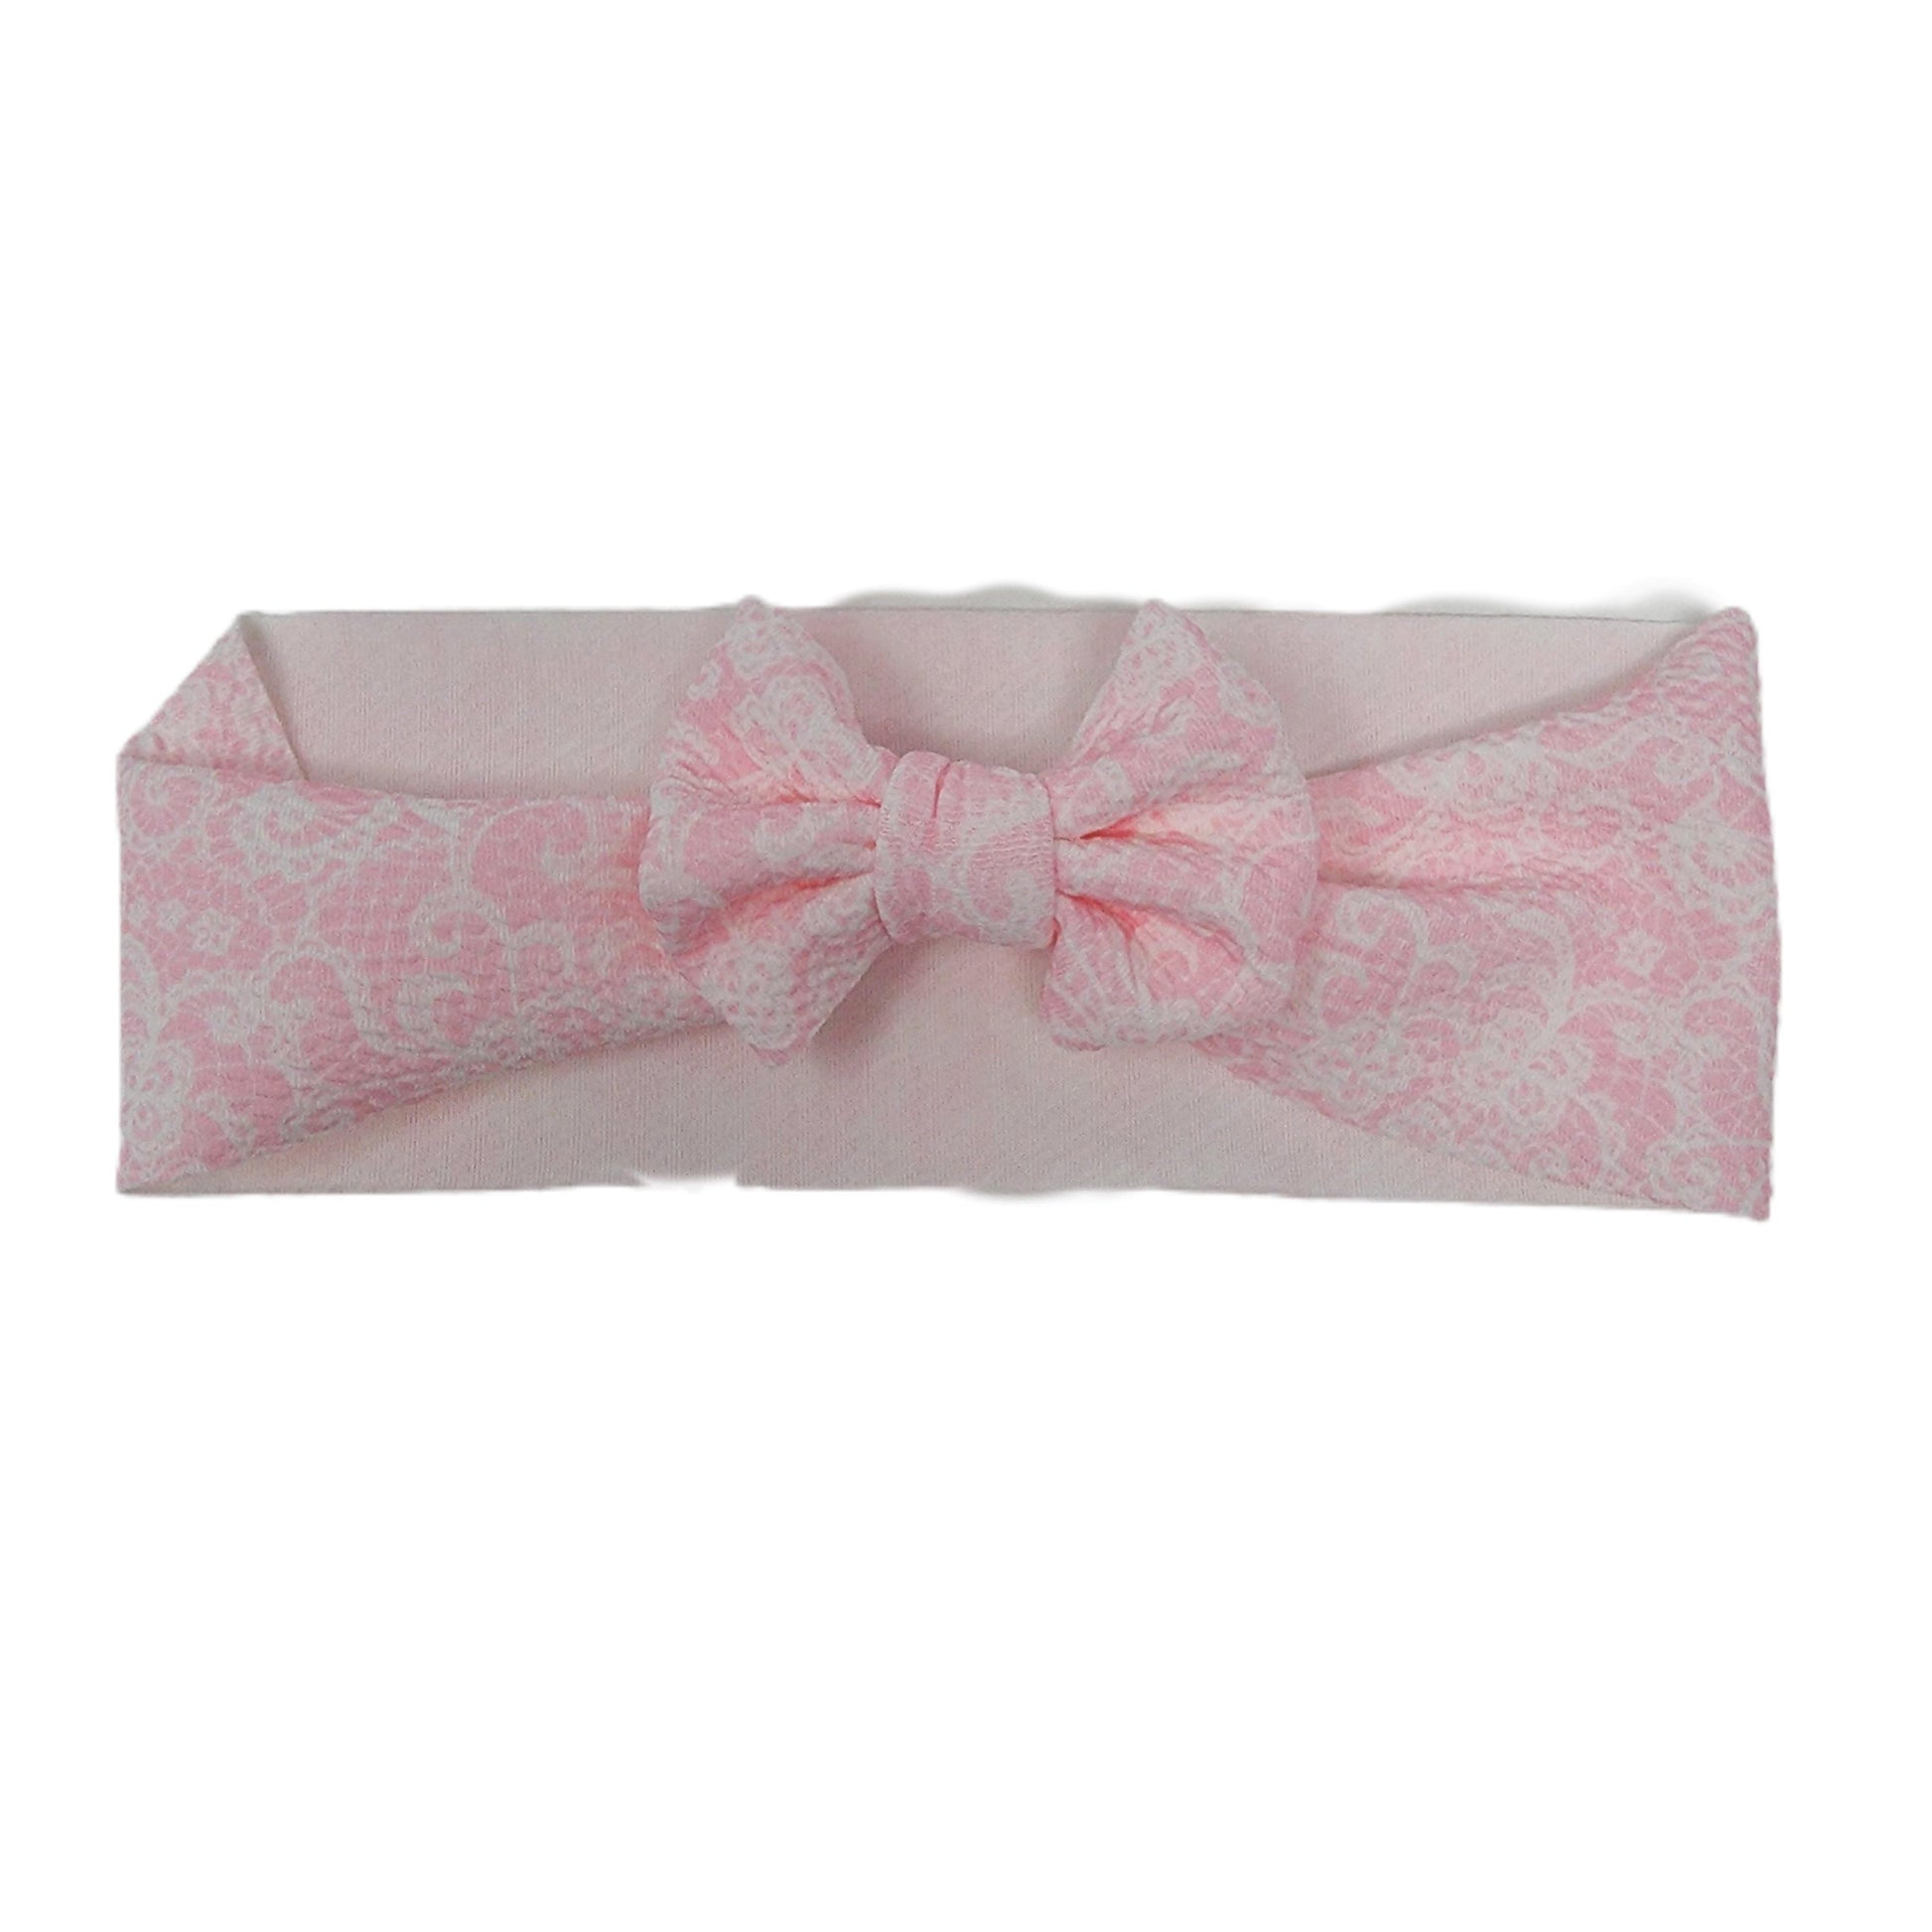 Pink Lace Fabric Bow Headwrap 3"